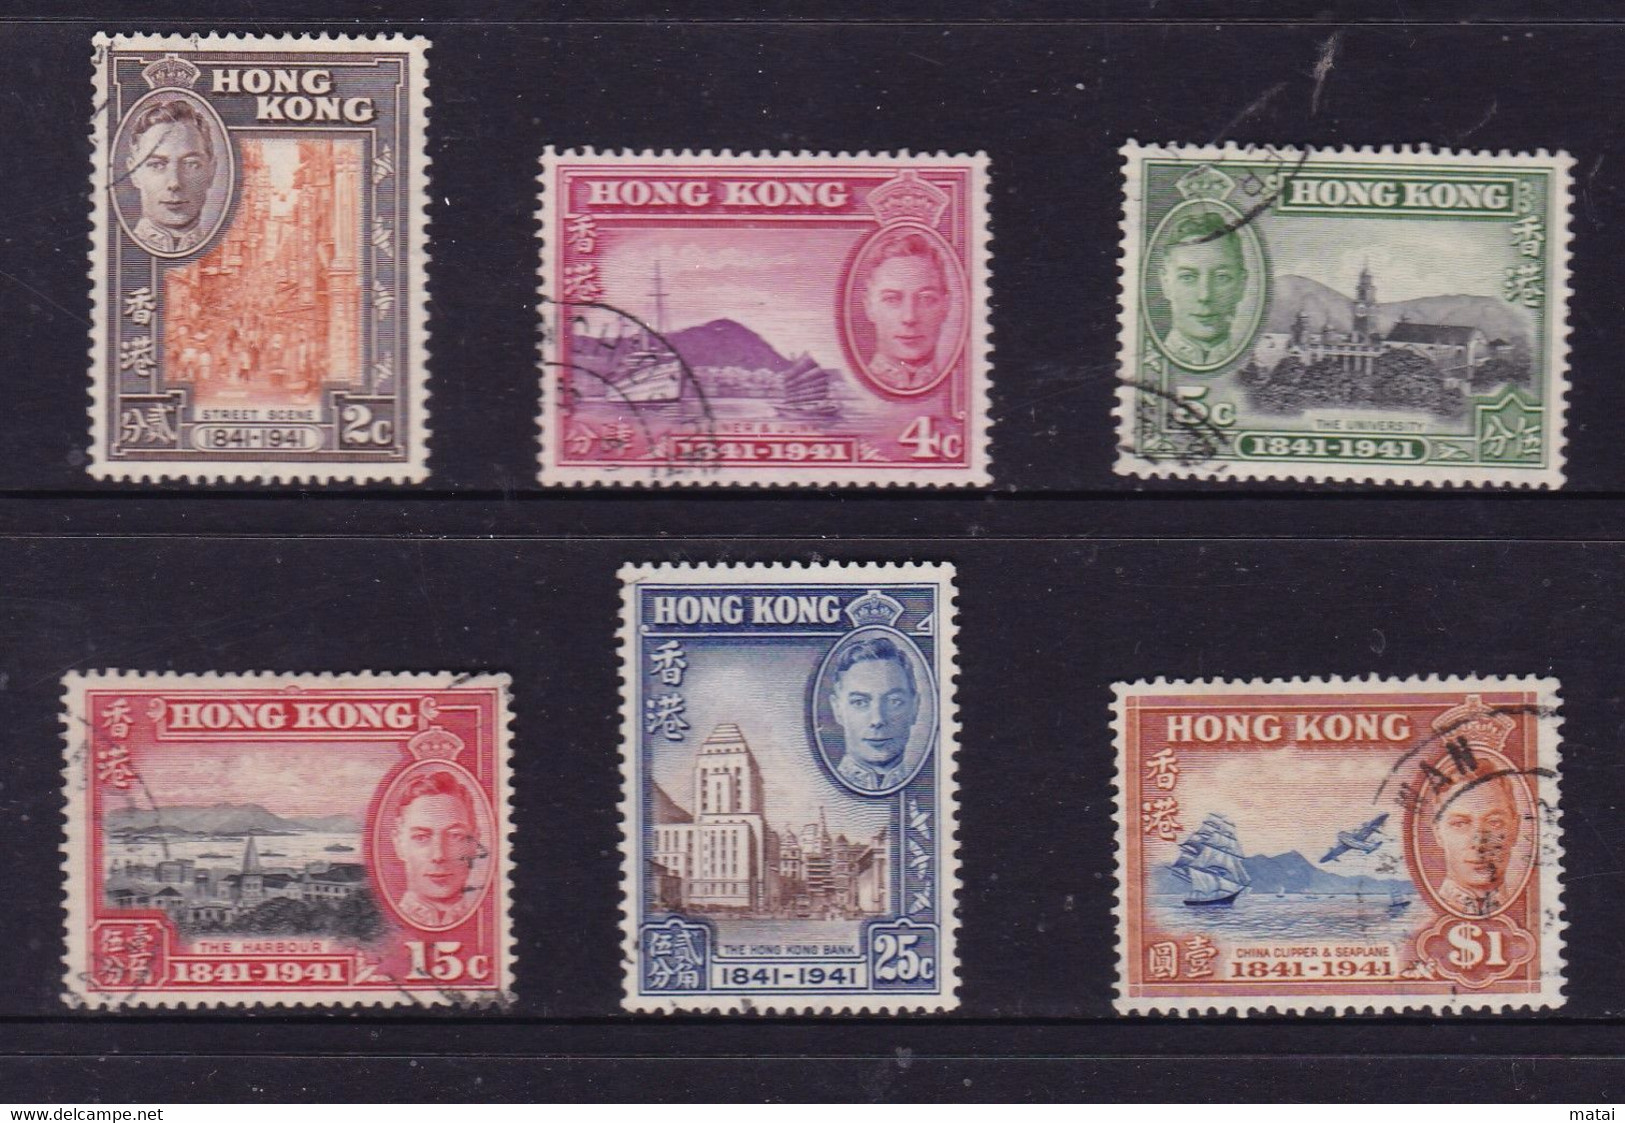 HONG KONG 1941, "Centenary Of British Occupation", Serie Cancelled, Very Light Trace Of Hinge - 1941-45 Japanese Occupation